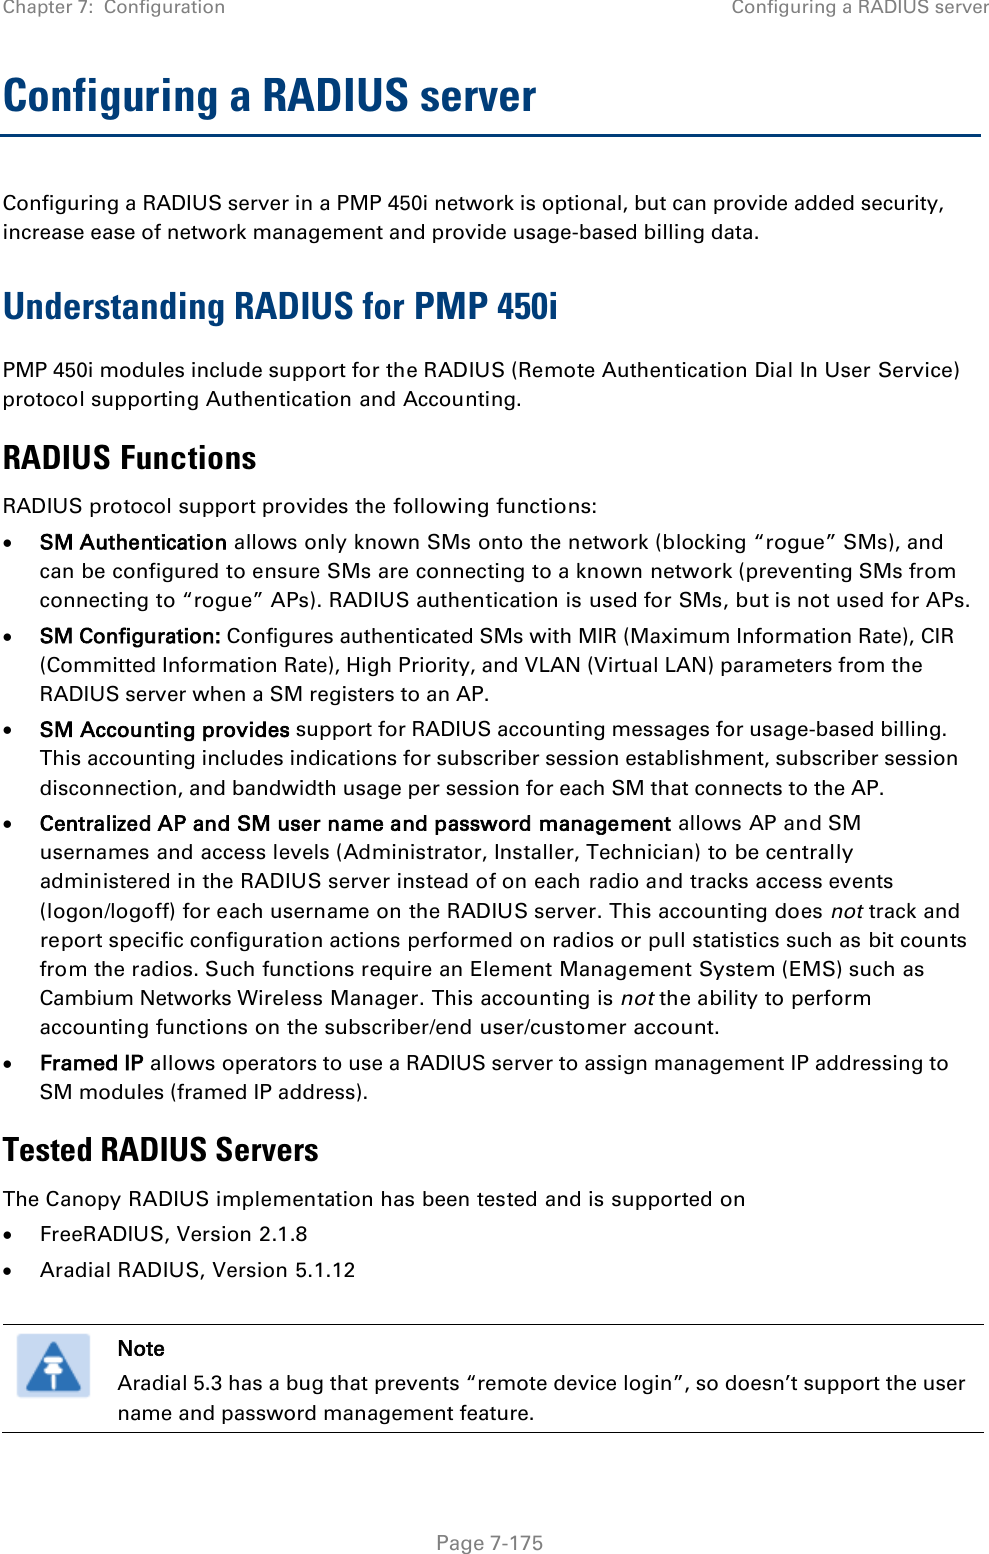 Chapter 7:  Configuration Configuring a RADIUS server   Page 7-175 Configuring a RADIUS server Configuring a RADIUS server in a PMP 450i network is optional, but can provide added security, increase ease of network management and provide usage-based billing data. Understanding RADIUS for PMP 450i PMP 450i modules include support for the RADIUS (Remote Authentication Dial In User Service) protocol supporting Authentication and Accounting. RADIUS Functions RADIUS protocol support provides the following functions: • SM Authentication allows only known SMs onto the network (blocking “rogue” SMs), and can be configured to ensure SMs are connecting to a known network (preventing SMs from connecting to “rogue” APs). RADIUS authentication is used for SMs, but is not used for APs. • SM Configuration: Configures authenticated SMs with MIR (Maximum Information Rate), CIR (Committed Information Rate), High Priority, and VLAN (Virtual LAN) parameters from the RADIUS server when a SM registers to an AP. • SM Accounting provides support for RADIUS accounting messages for usage-based billing.  This accounting includes indications for subscriber session establishment, subscriber session disconnection, and bandwidth usage per session for each SM that connects to the AP.   • Centralized AP and SM user name and password management allows AP and SM usernames and access levels (Administrator, Installer, Technician) to be centrally administered in the RADIUS server instead of on each radio and tracks access events (logon/logoff) for each username on the RADIUS server. This accounting does not track and report specific configuration actions performed on radios or pull statistics such as bit counts from the radios. Such functions require an Element Management System (EMS) such as Cambium Networks Wireless Manager. This accounting is not the ability to perform accounting functions on the subscriber/end user/customer account. • Framed IP allows operators to use a RADIUS server to assign management IP addressing to SM modules (framed IP address). Tested RADIUS Servers The Canopy RADIUS implementation has been tested and is supported on • FreeRADIUS, Version 2.1.8 • Aradial RADIUS, Version 5.1.12   Note Aradial 5.3 has a bug that prevents “remote device login”, so doesn’t support the user name and password management feature.  